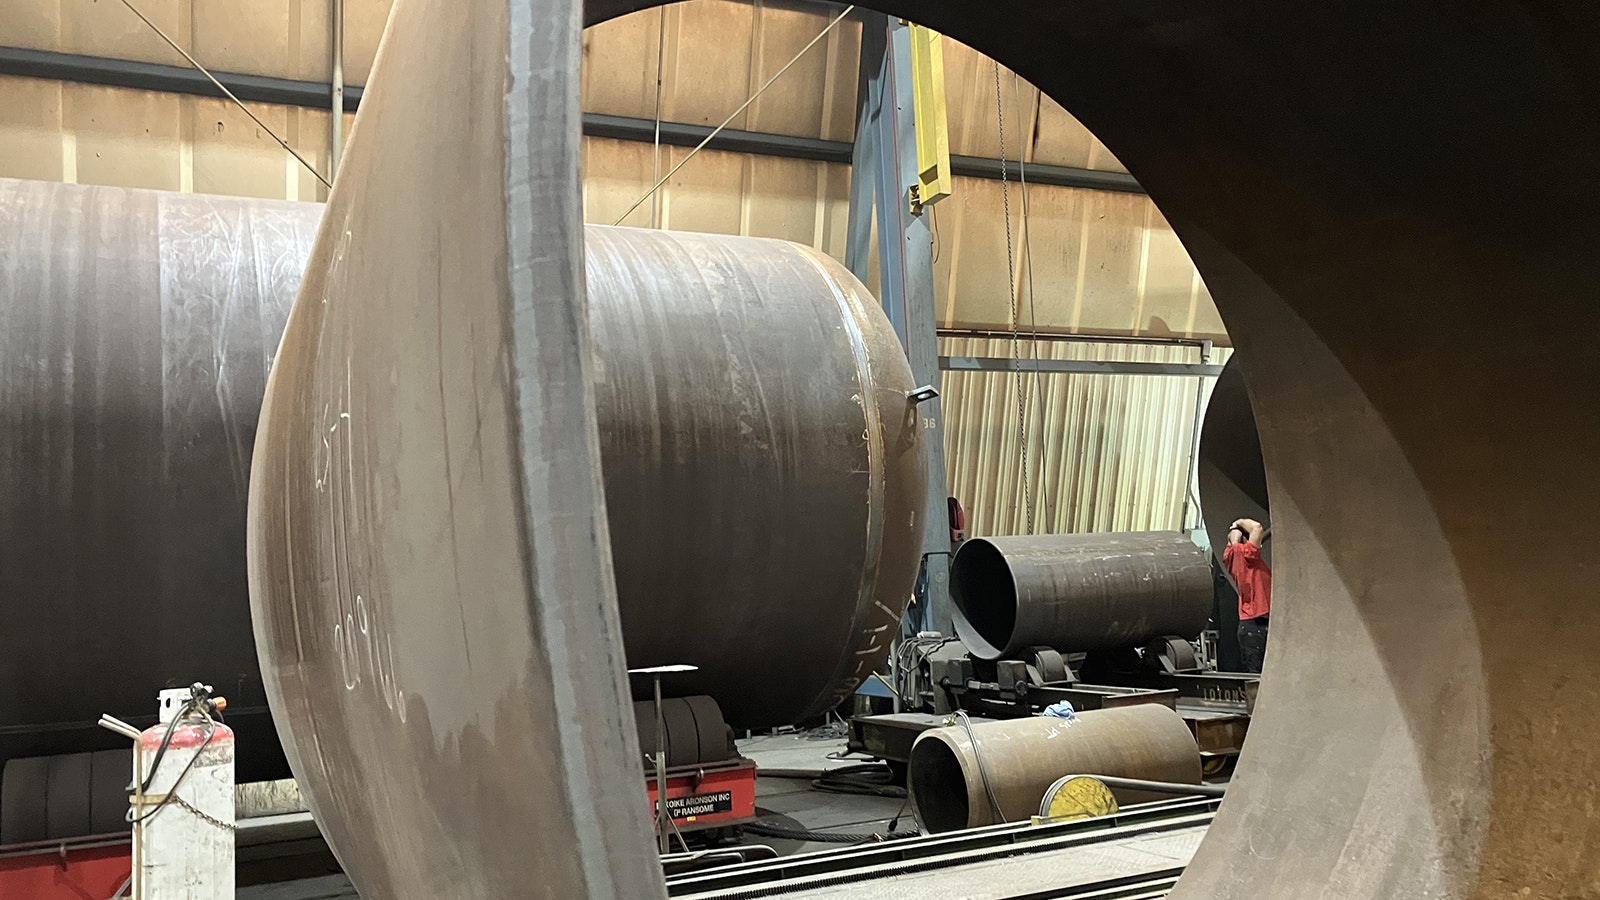 Rounded and welded steel in the process of becoming vessels at High Country Fabrication.